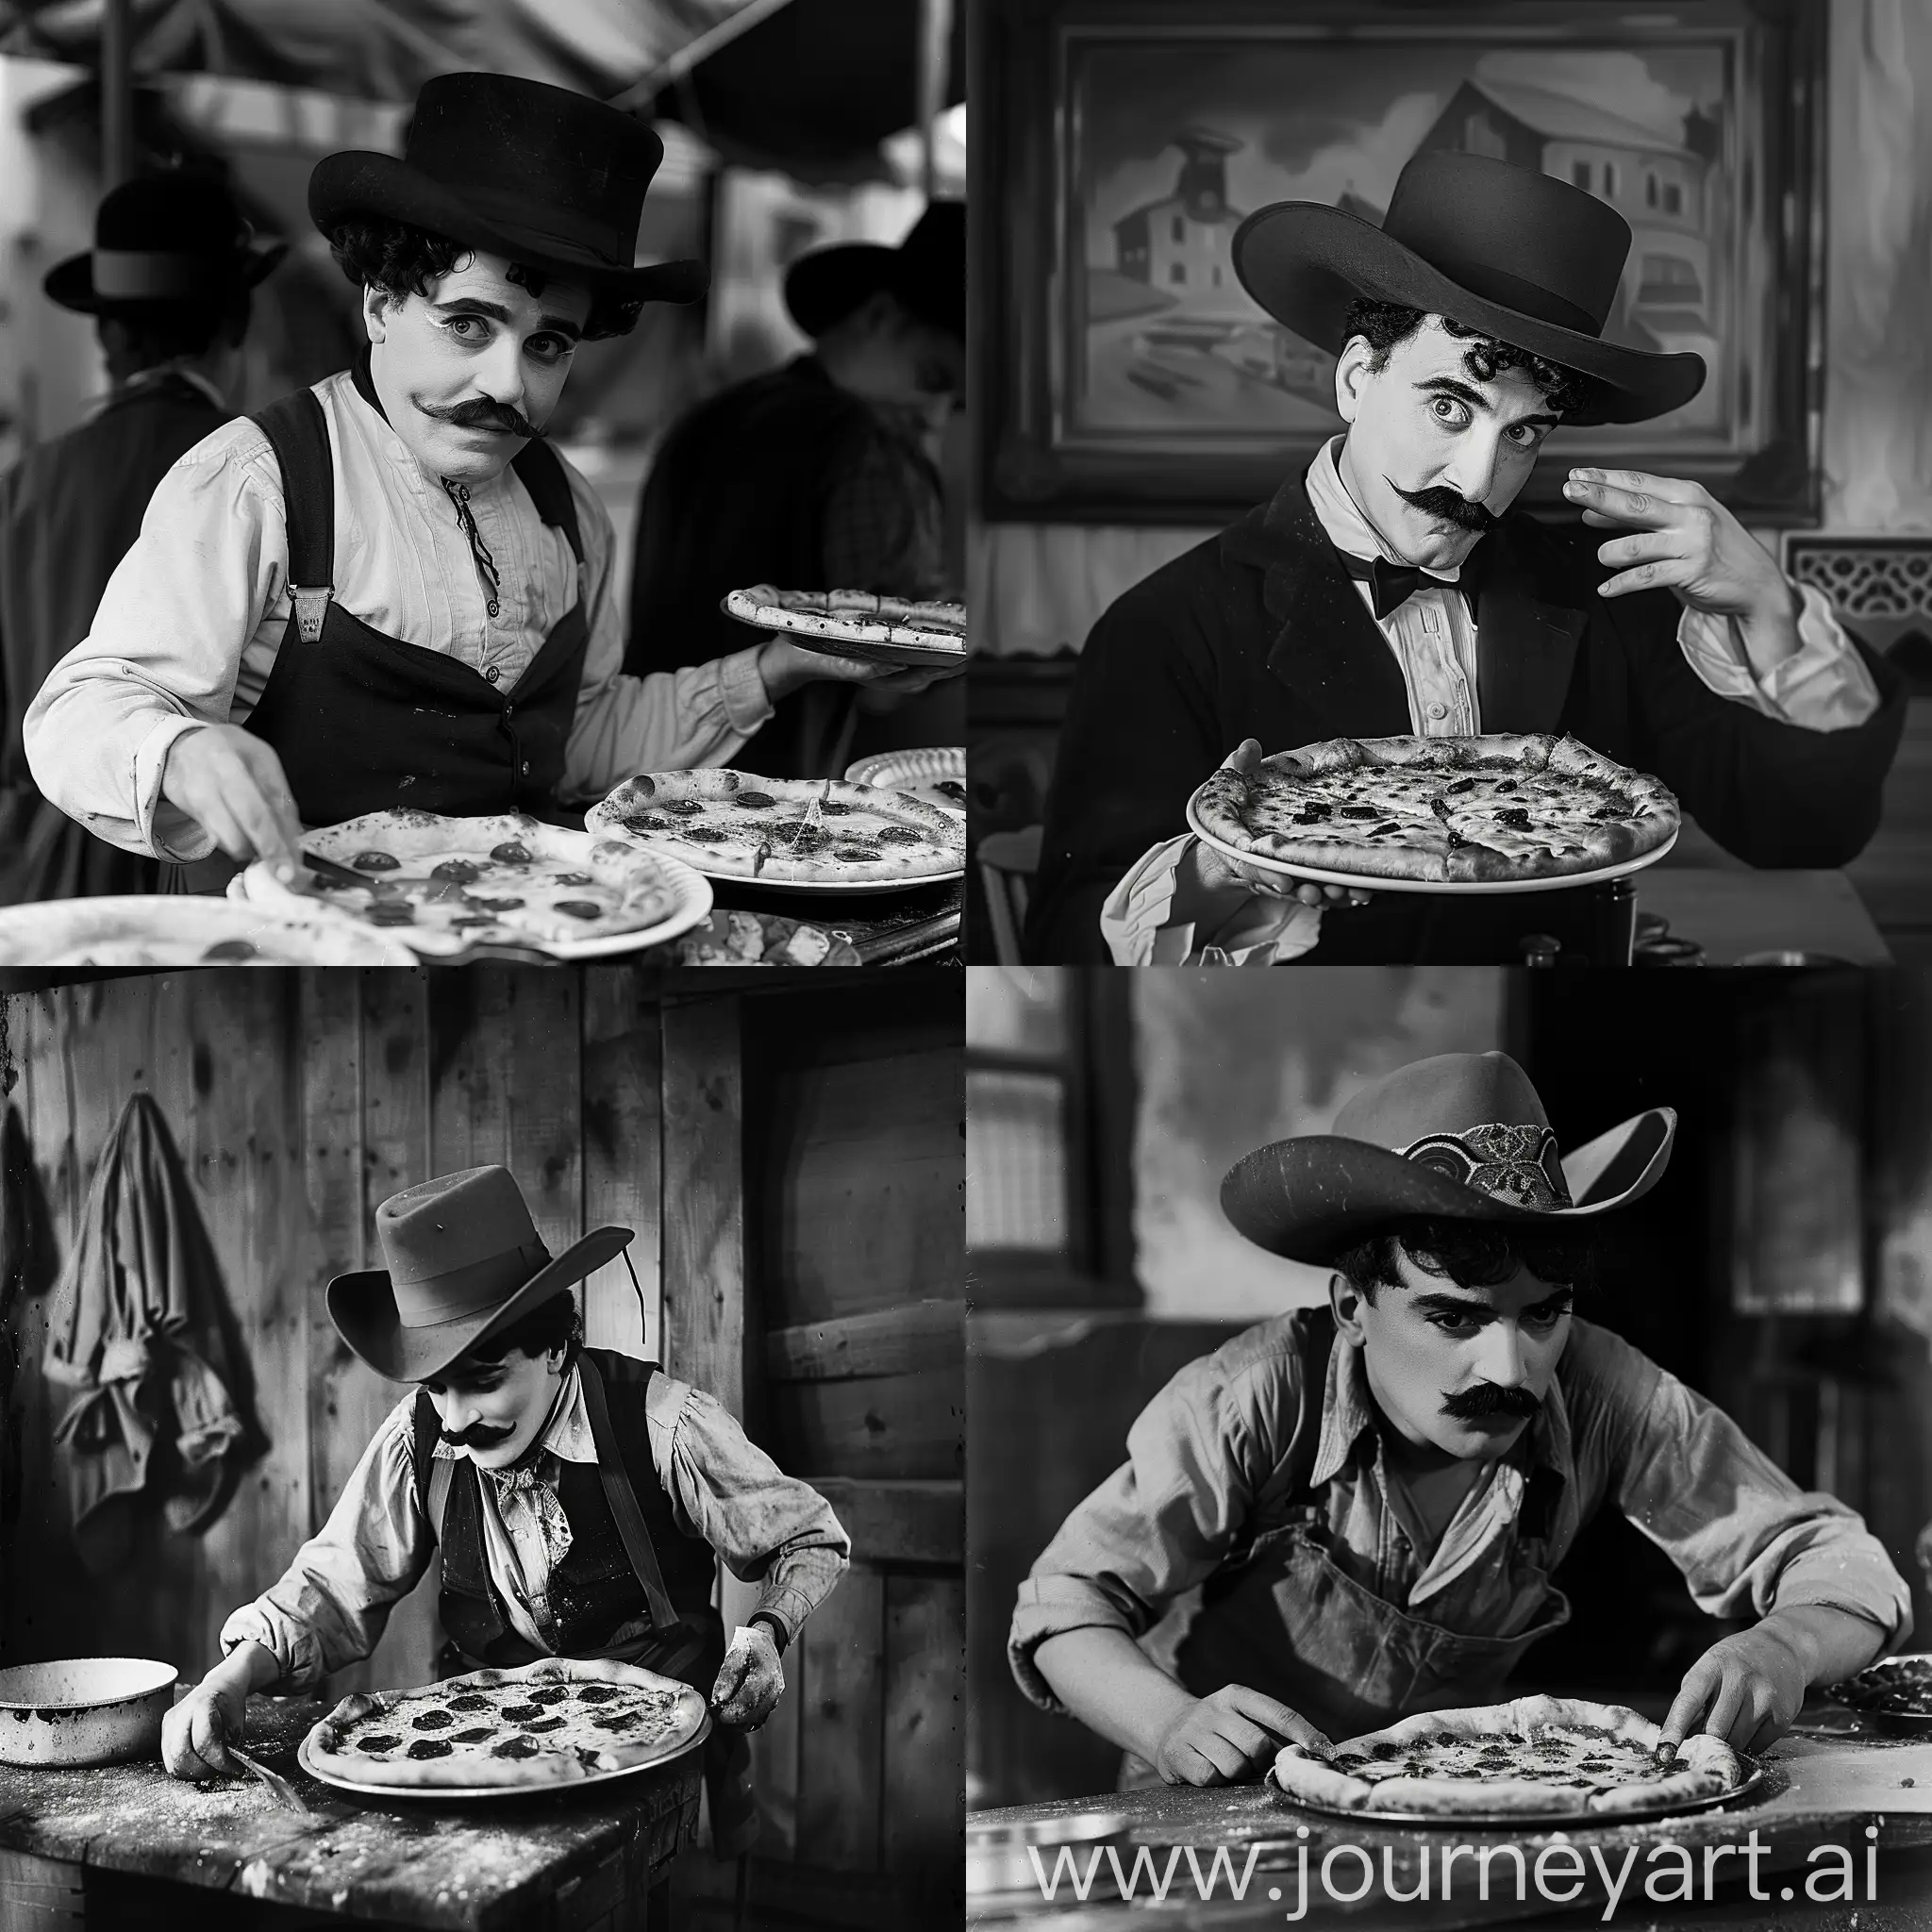 Charlie-Chaplin-in-Cowboy-Hat-Baking-Pizza-in-Classic-Monochrome-Style